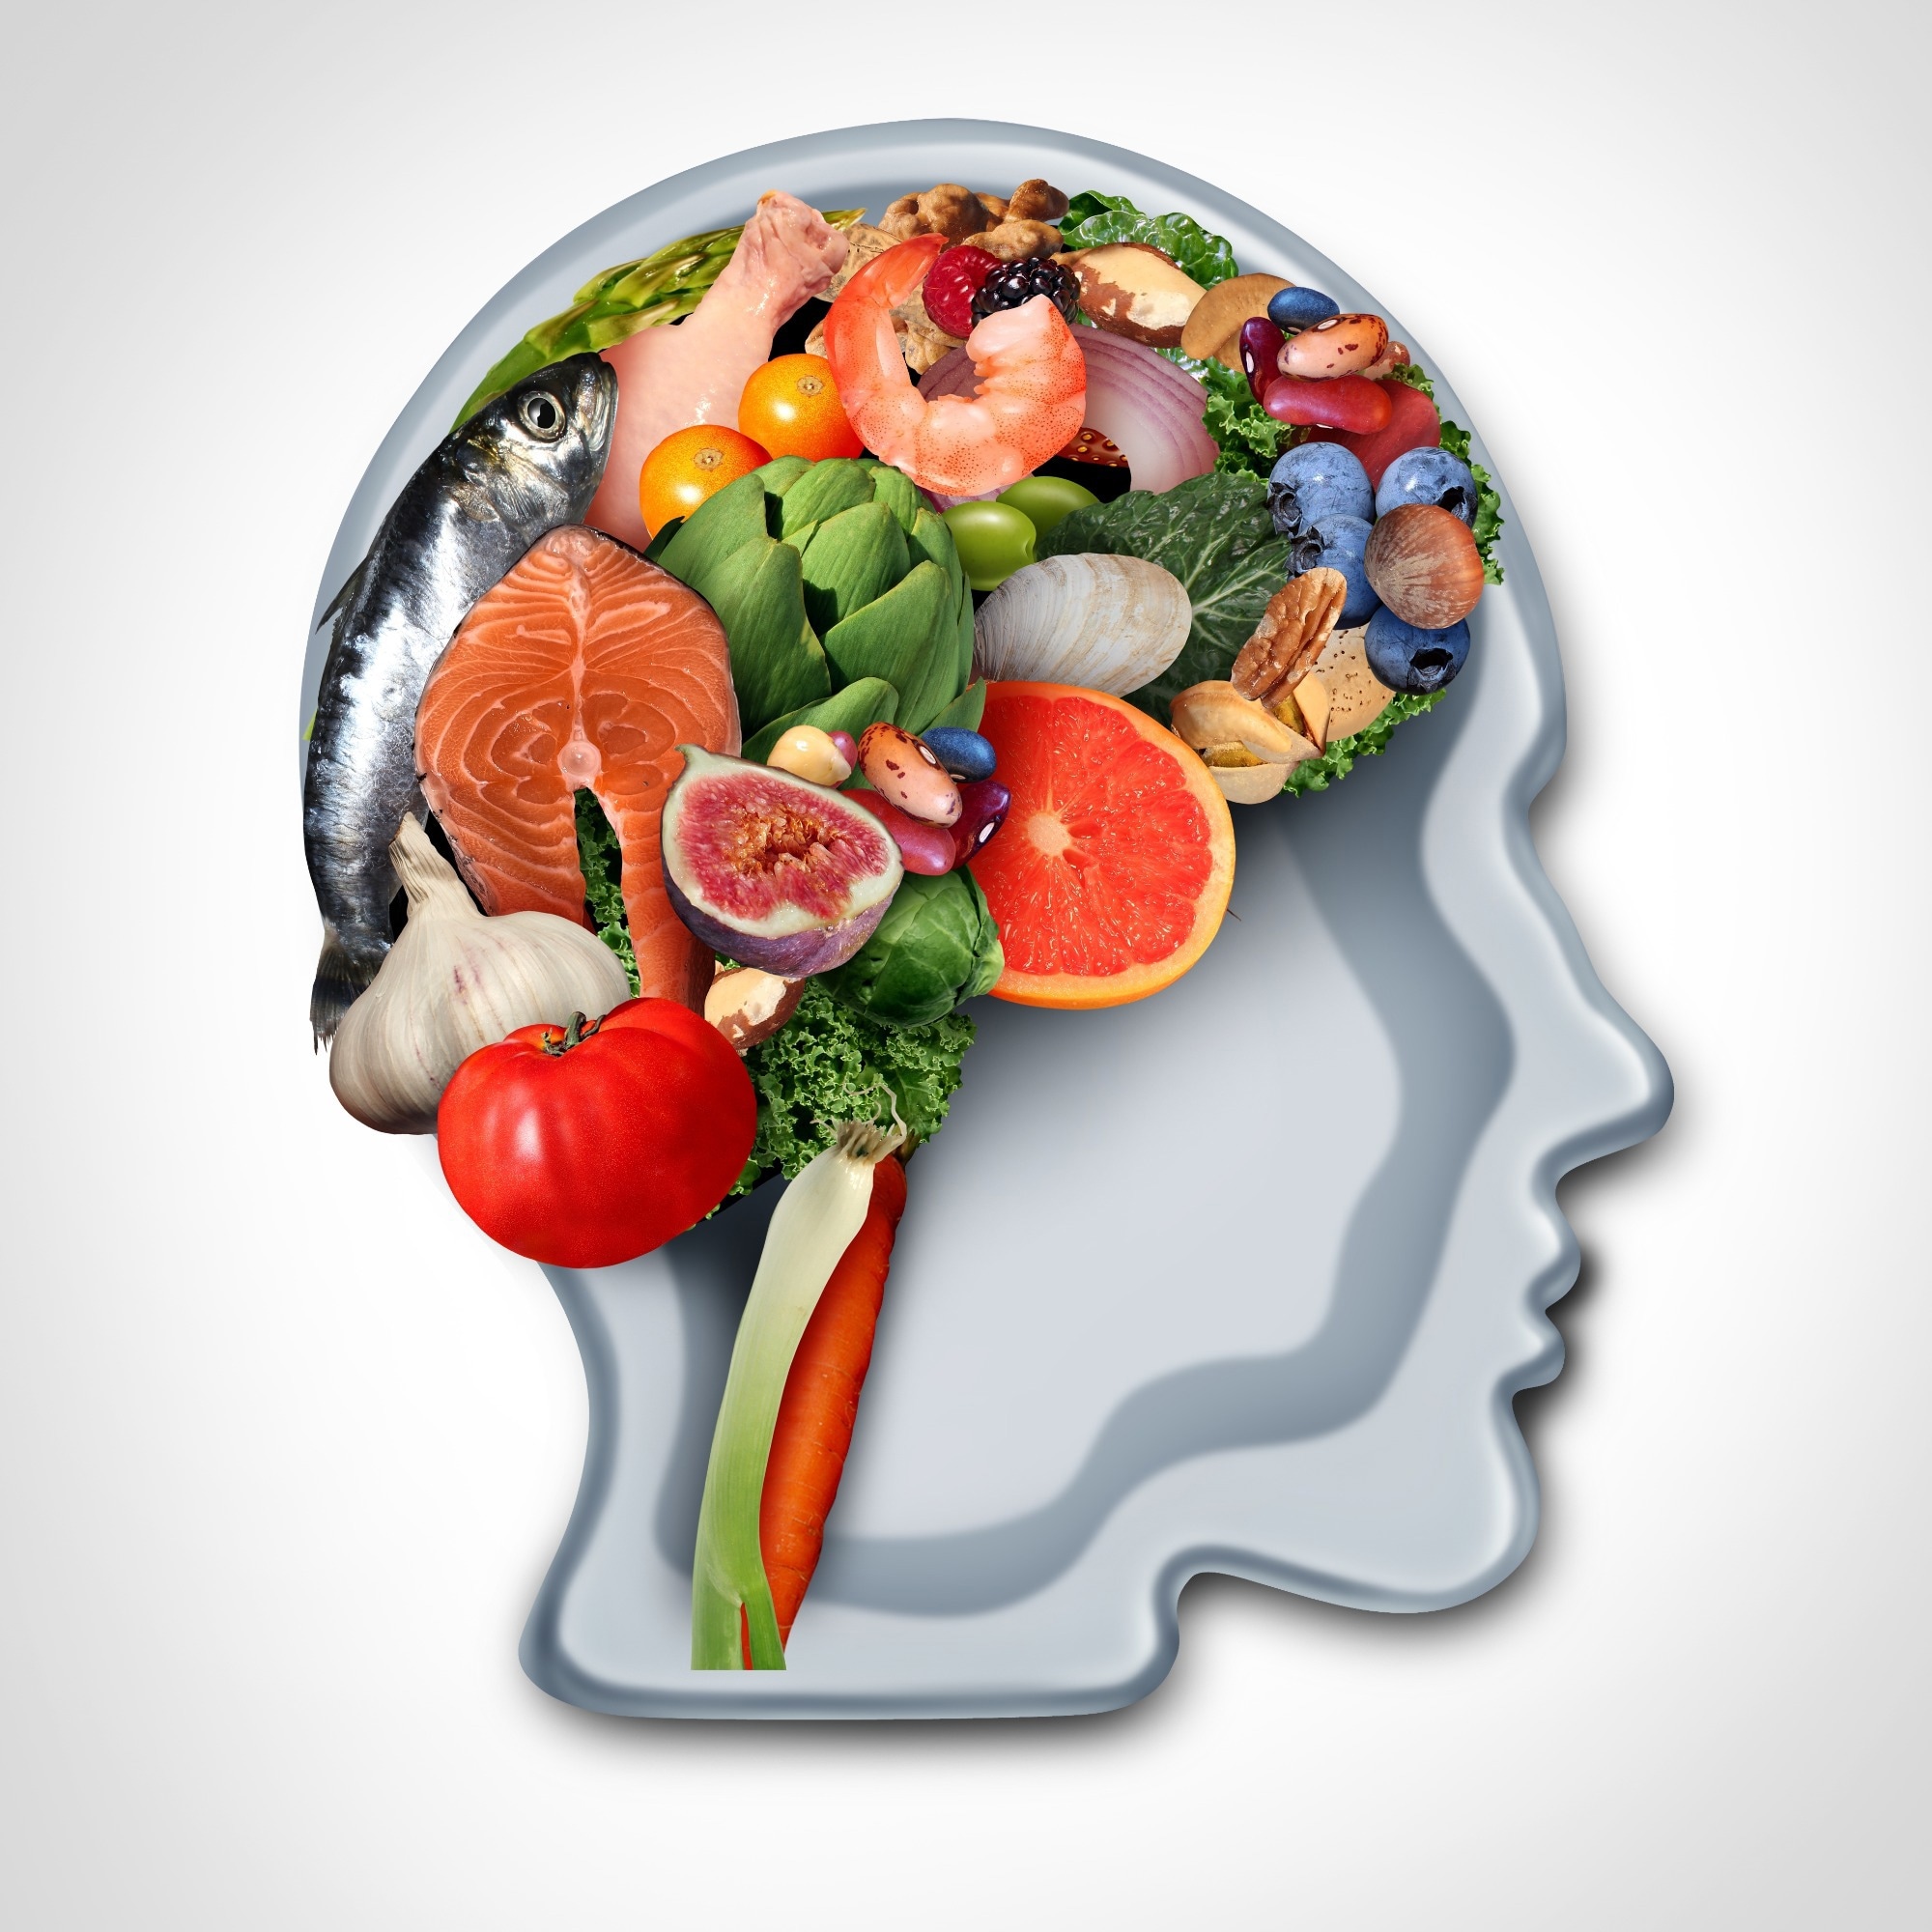 Study: A Mediterranean Diet and Walking Intervention to Reduce Cognitive Decline and Dementia Risk in Independently Living Older Australians: The MedWalk Randomized Controlled Trial Experimental Protocol, Including COVID-19 Related Modifications and Baseline Characteristics. Image Credit: Lightspring / Shutterstock